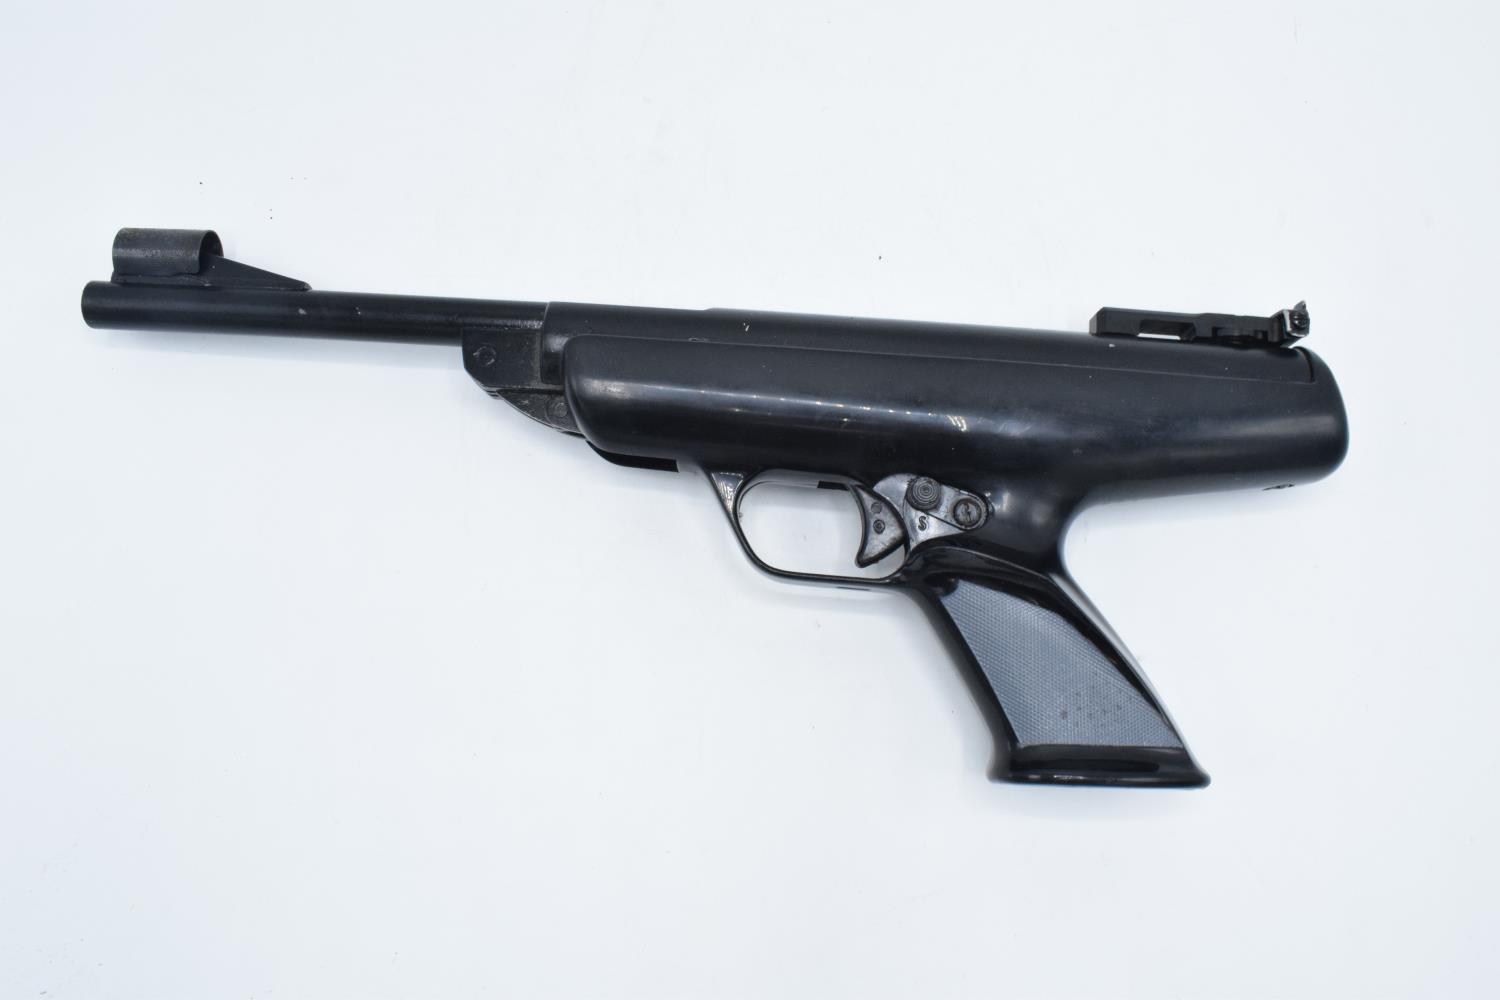 BSA Scorpion .22 cal air pistol. There is wear to the gun in the form of scratches, dents and knocks